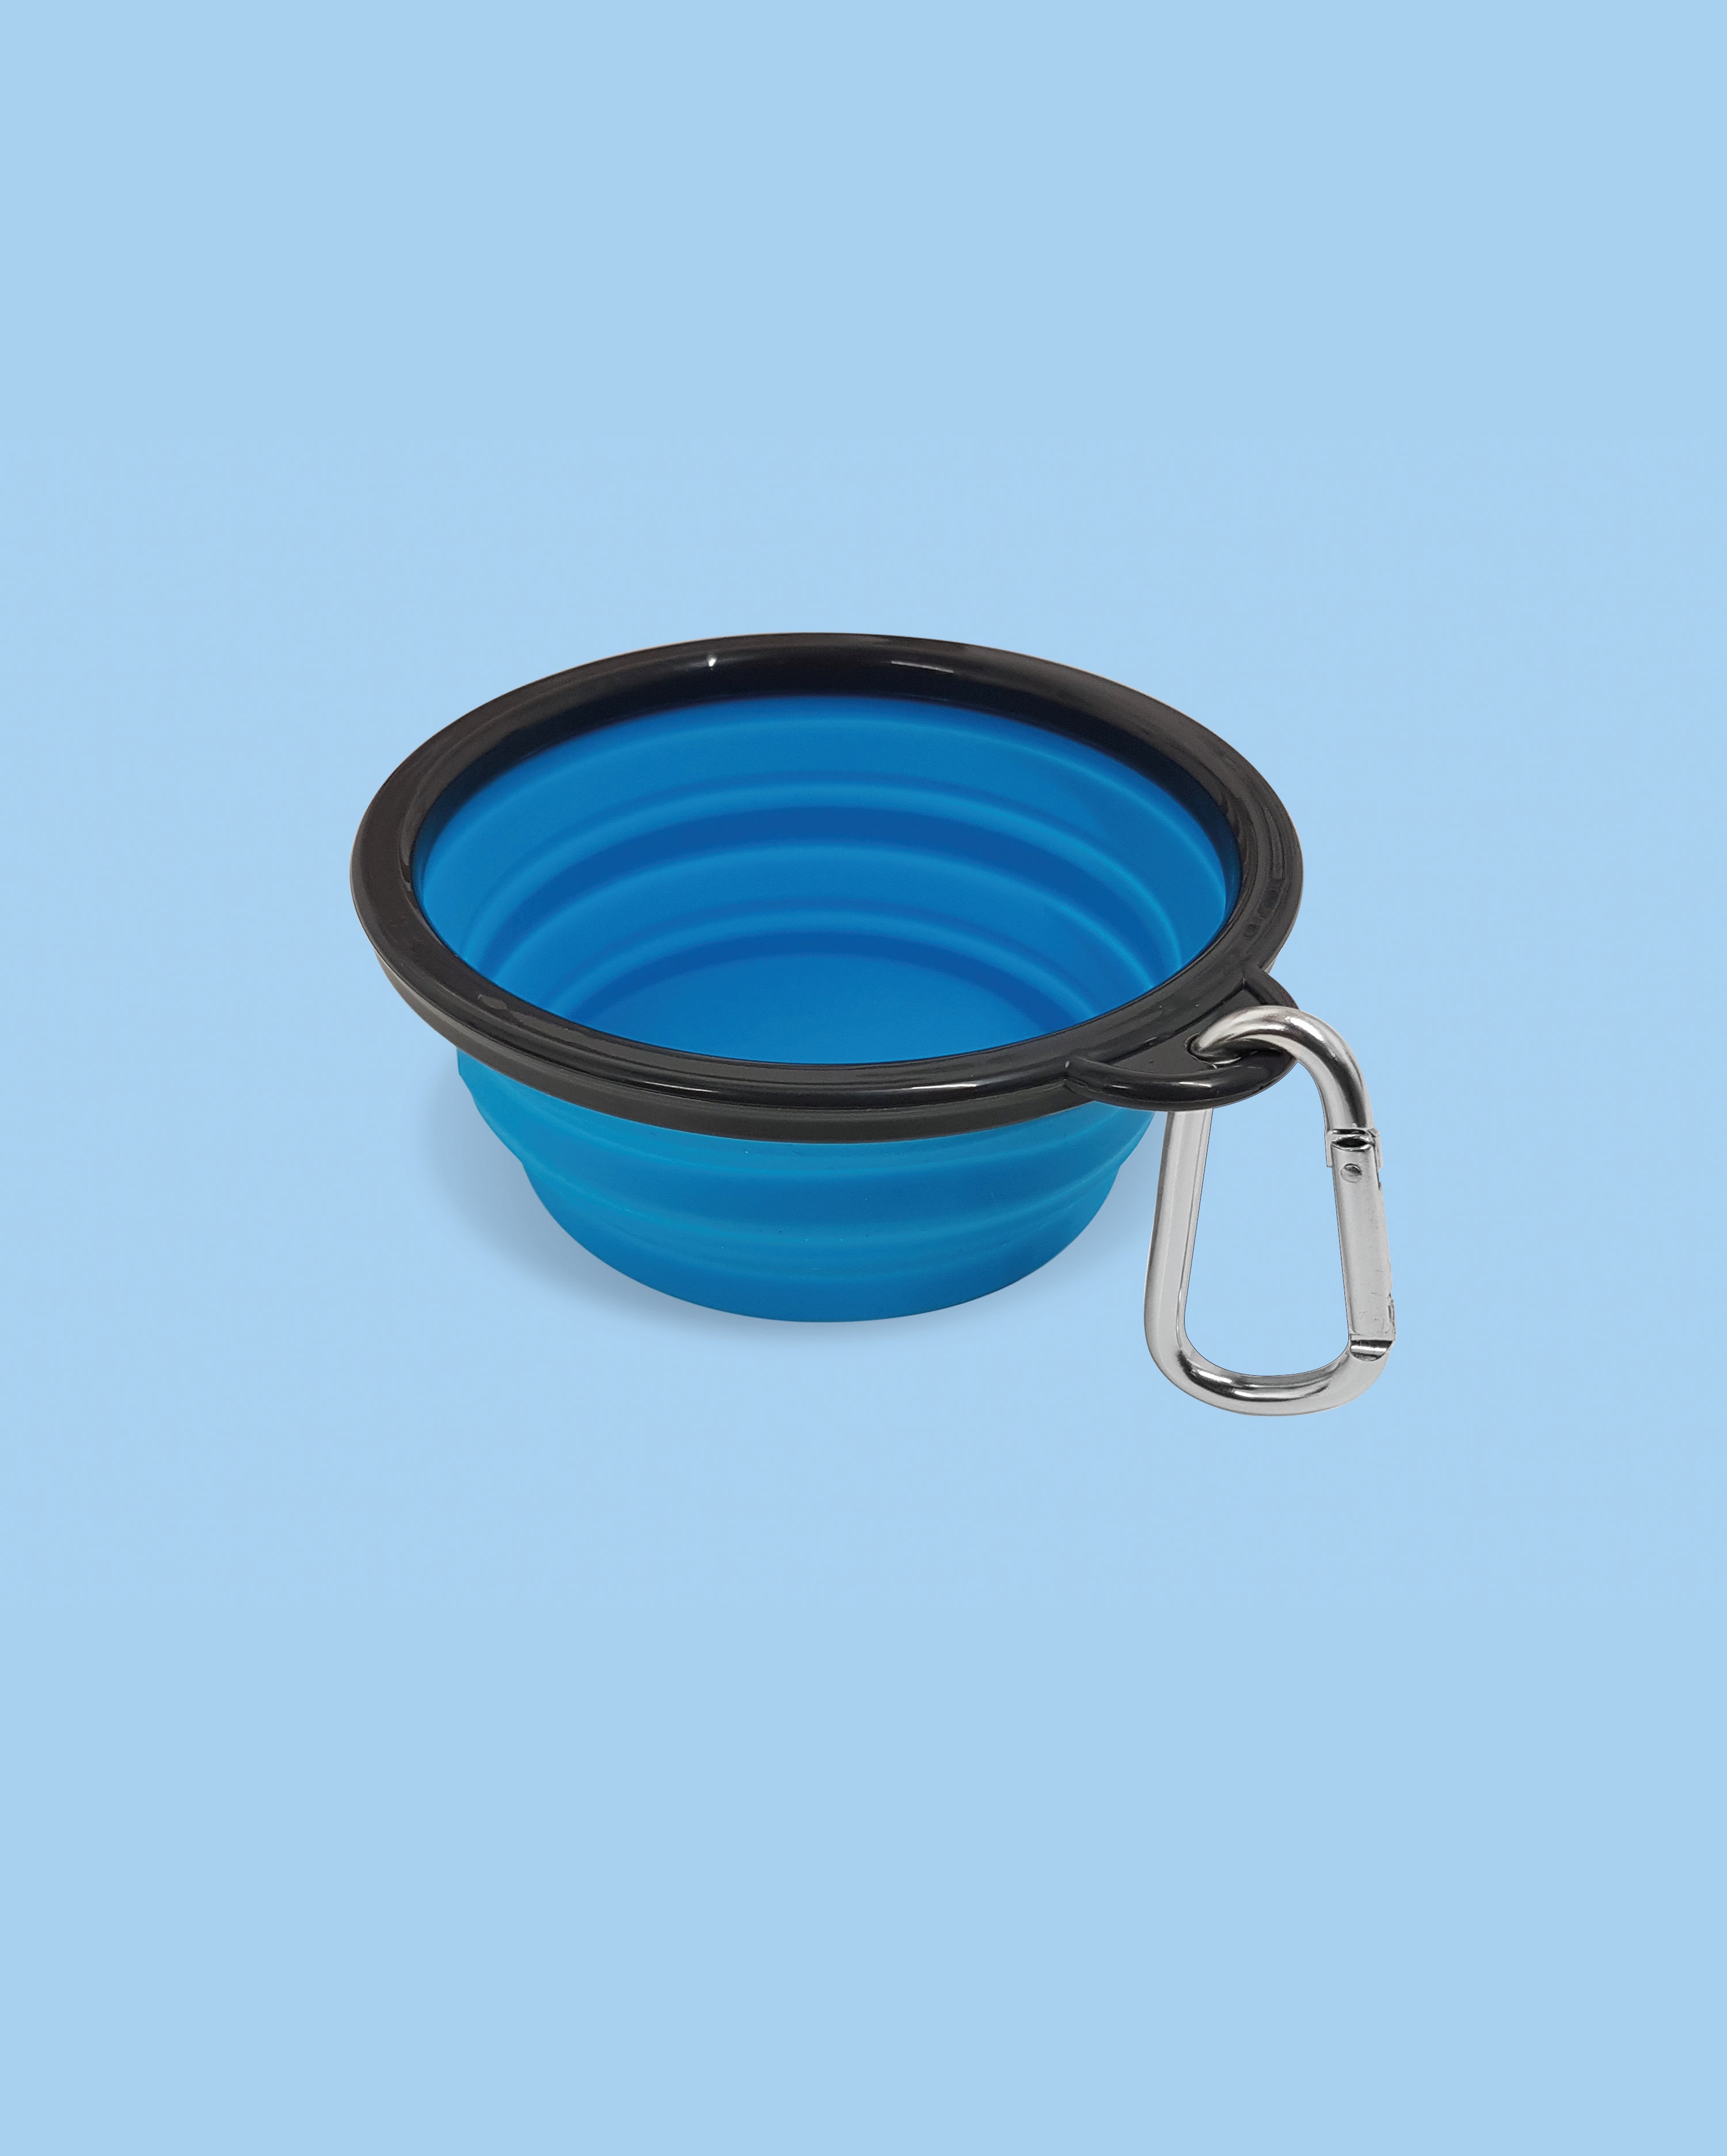 Dog Travel Bowl with clip - Blue